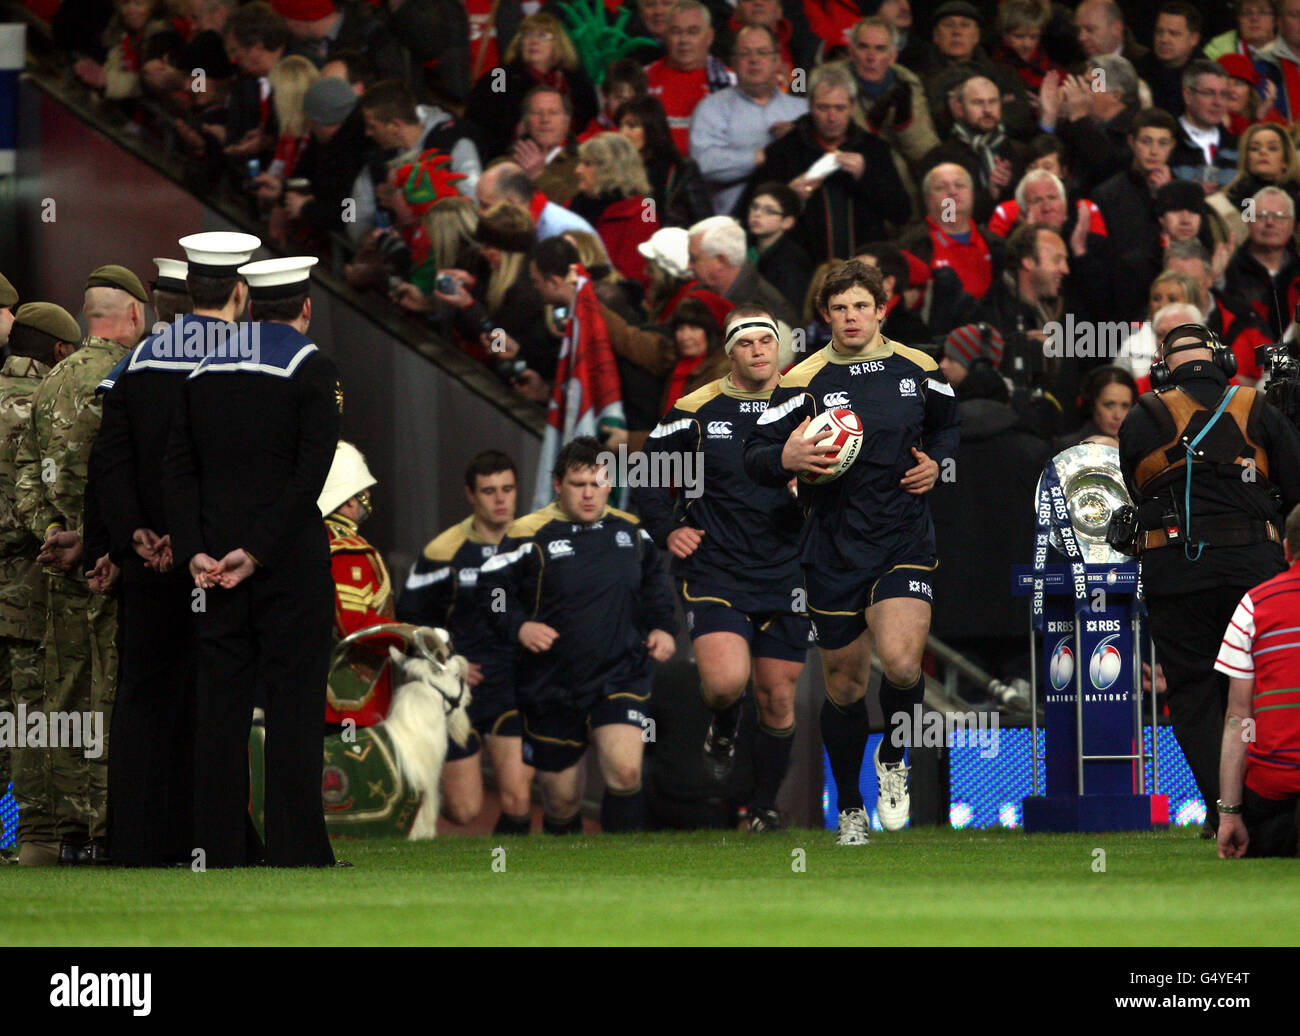 Scotlands captain Ross Ford leads his team out for 6Nations match against Wales at the Millennium Stadium Stock Photo